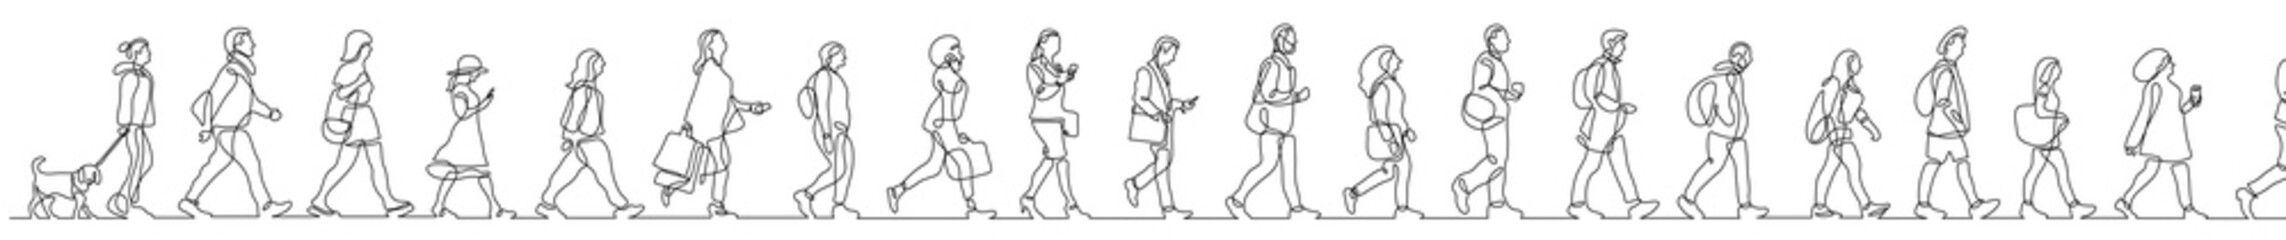 continuous line drawing vector illustration with FULLY EDITABLE STROKE of group of various common people walking on street